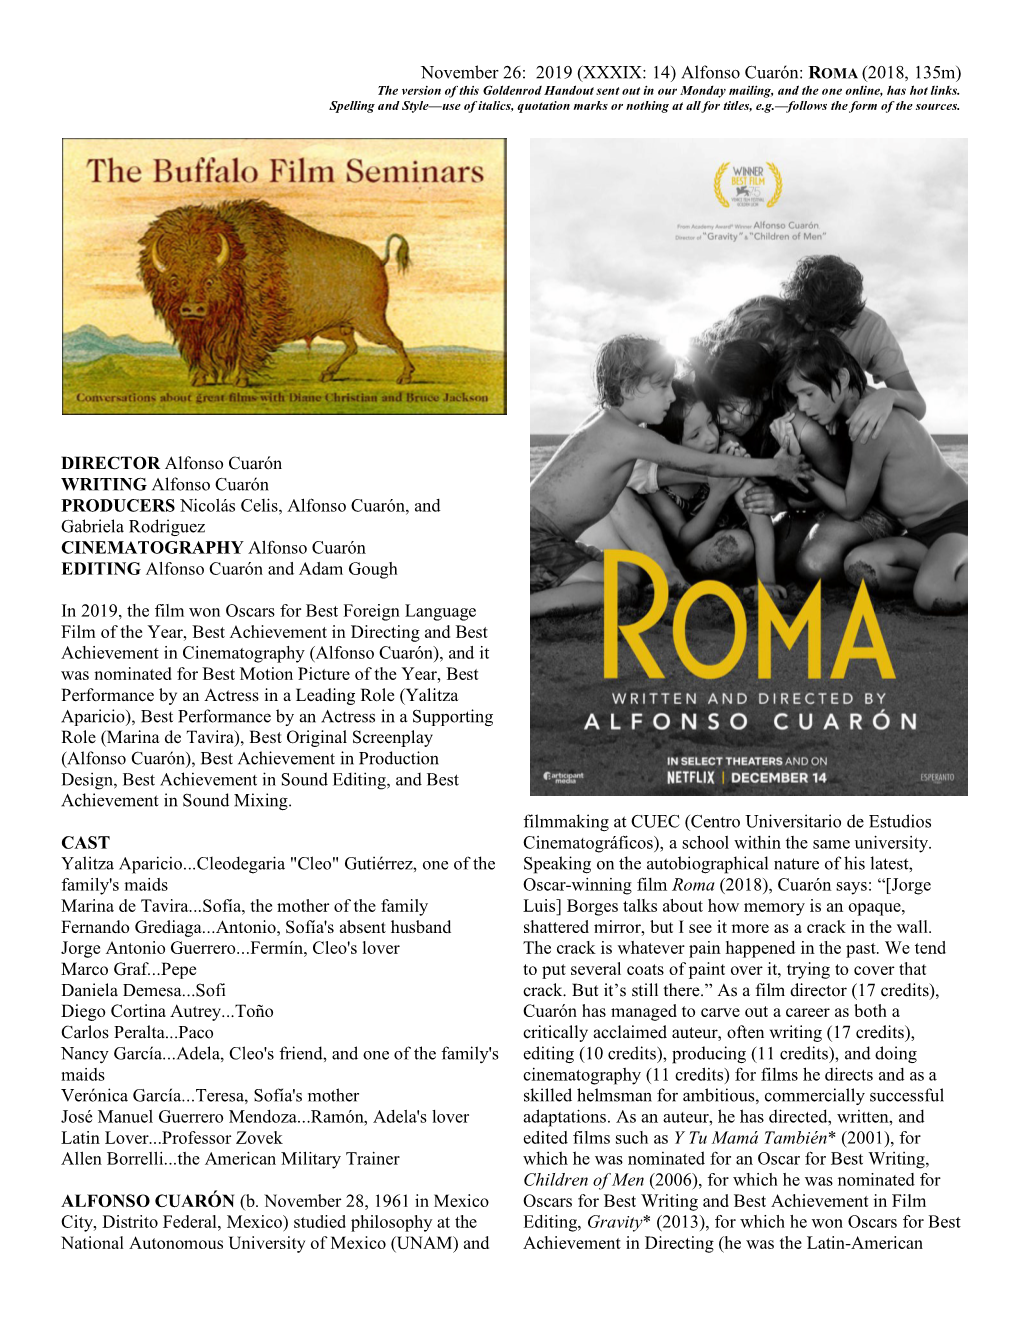 Alfonso Cuarón: ROMA (2018, 135M) the Version of This Goldenrod Handout Sent out in Our Monday Mailing, and the One Online, Has Hot Links